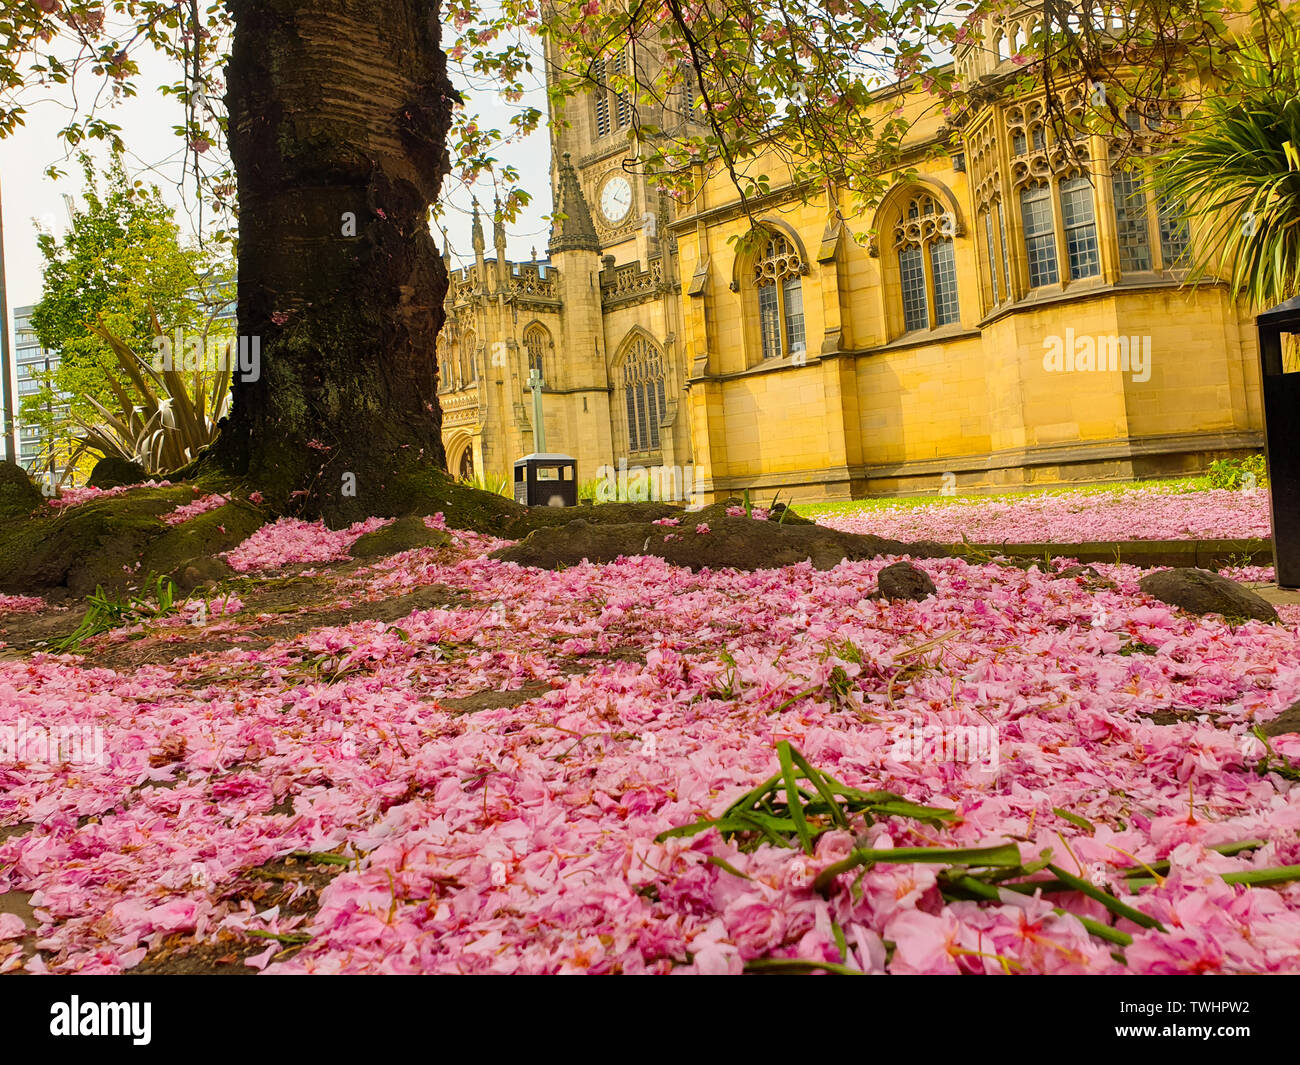 Pink cherry blossom petals covering the ground under a sakura tree outside Manchester Cathedral in spring Stock Photo